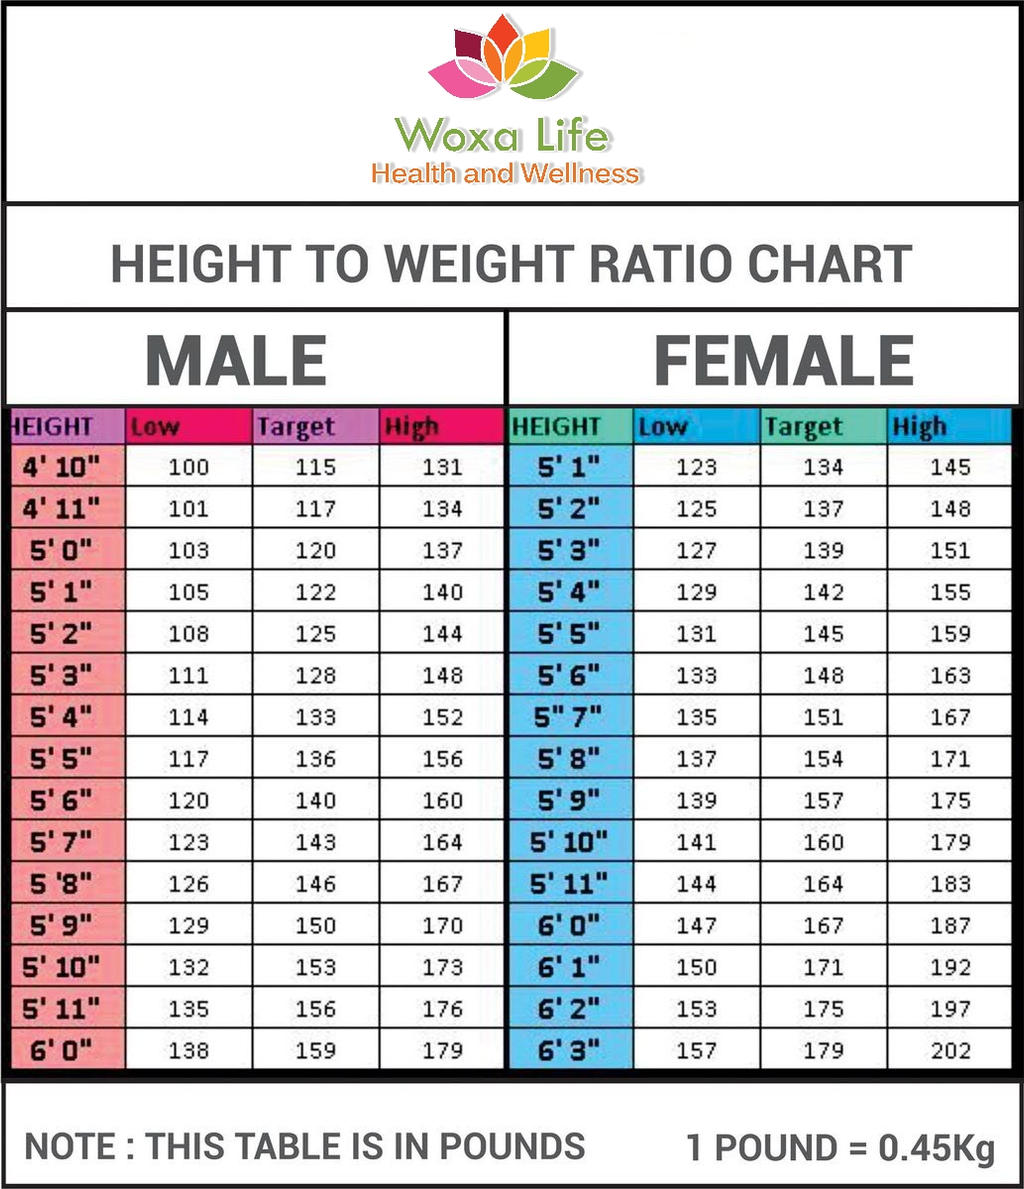 height charts Asian and weight